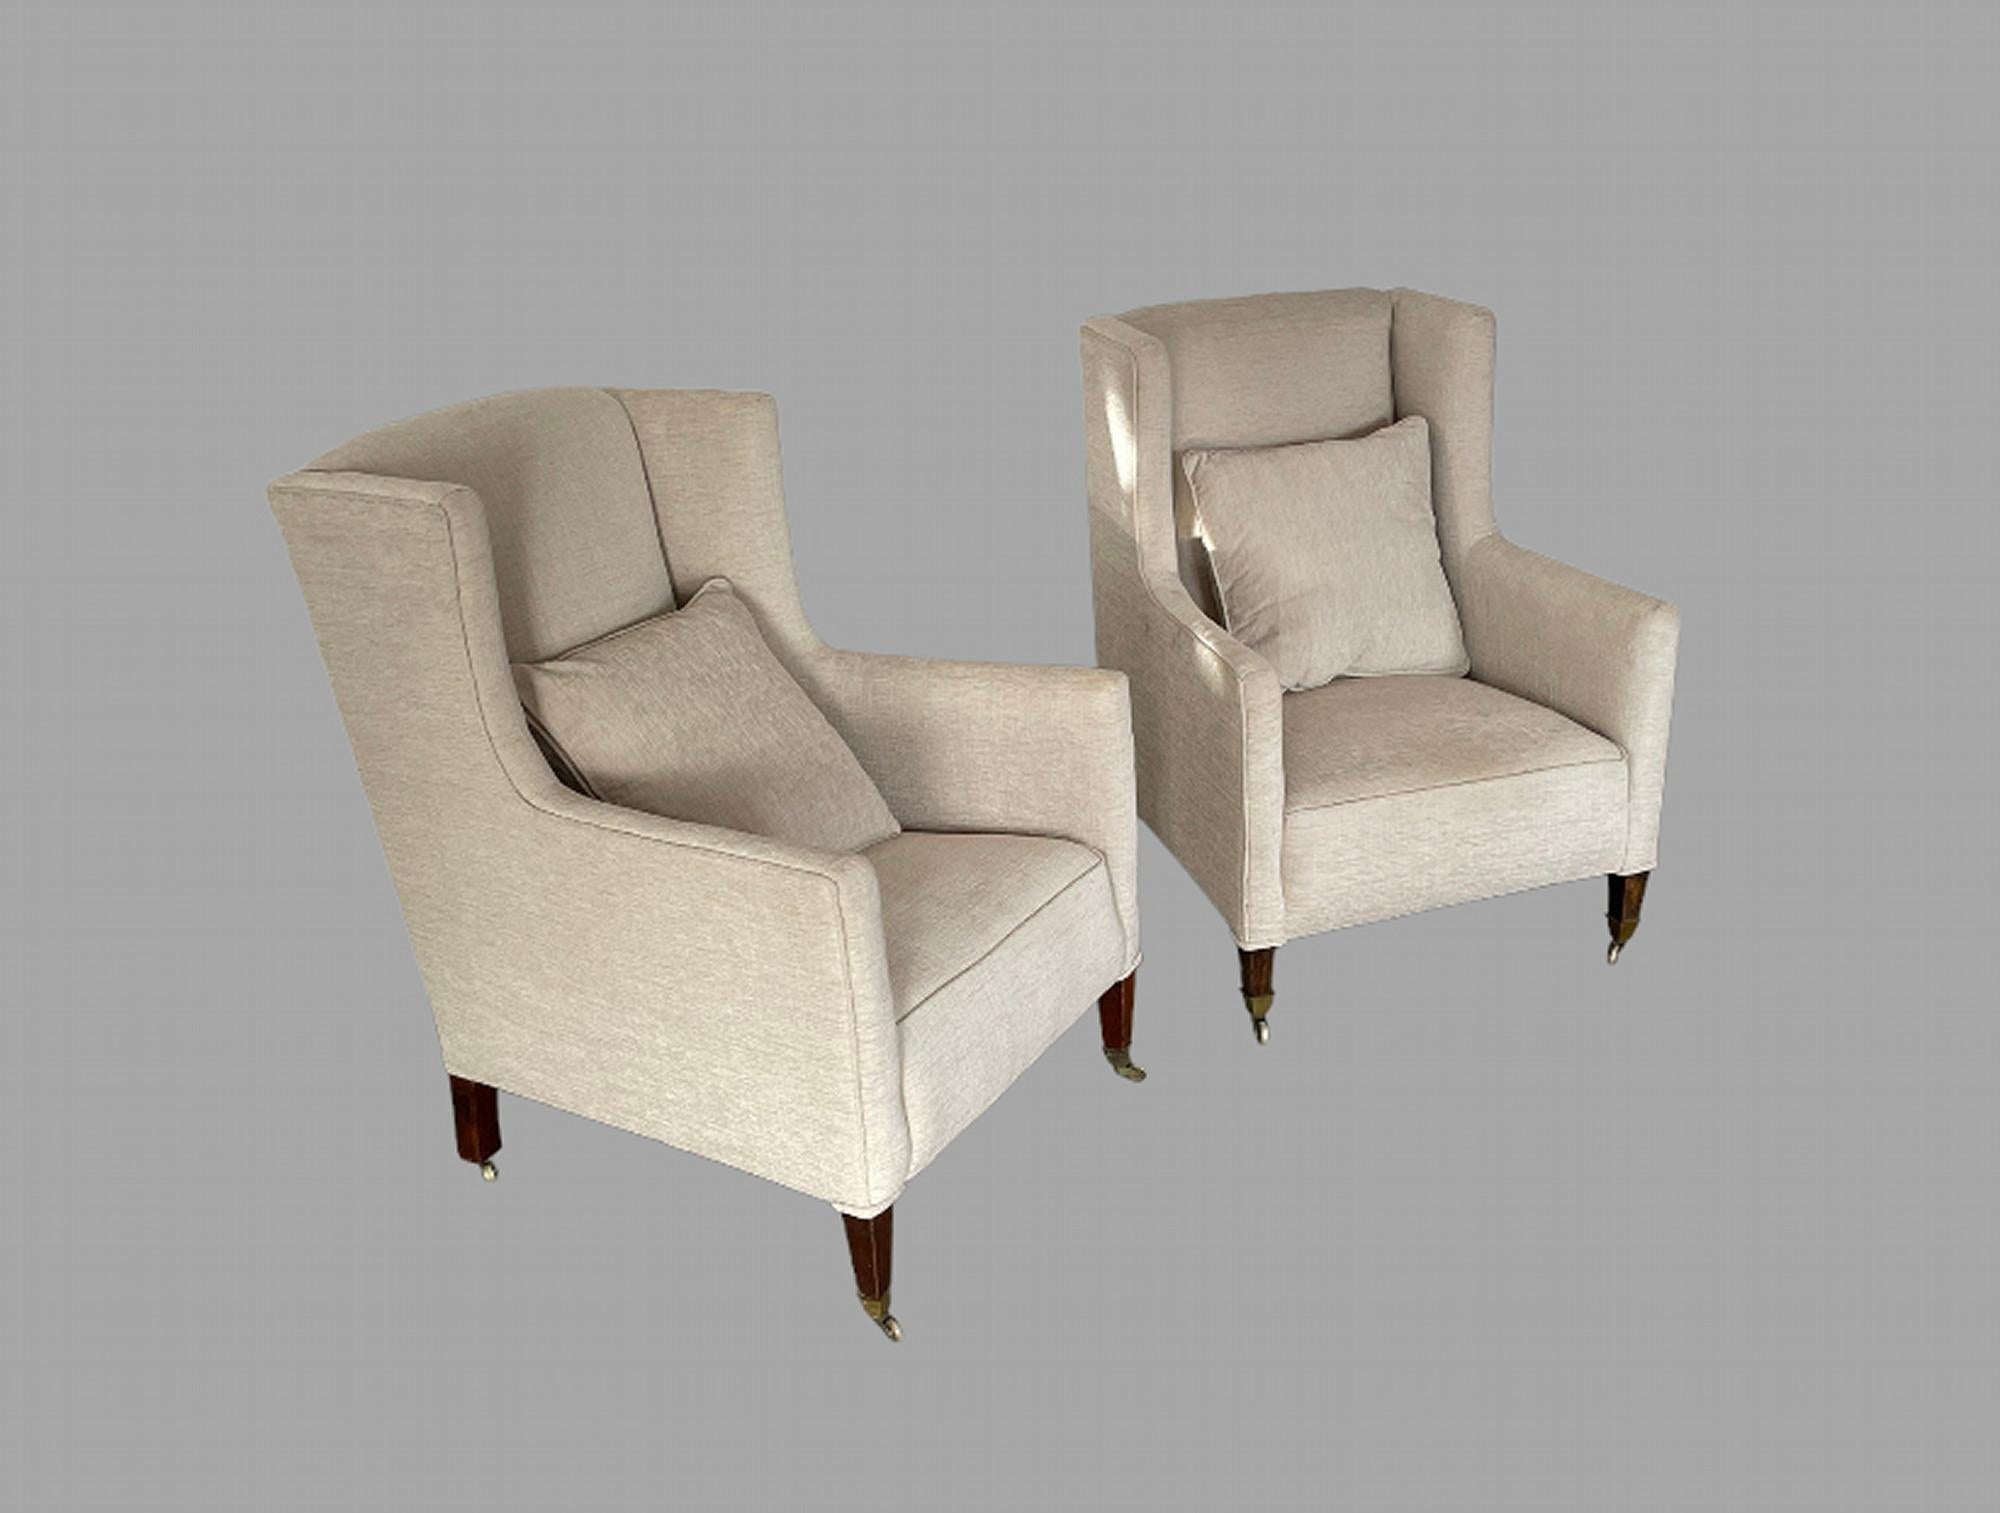 A Pair of Edwardian Armchairs 1